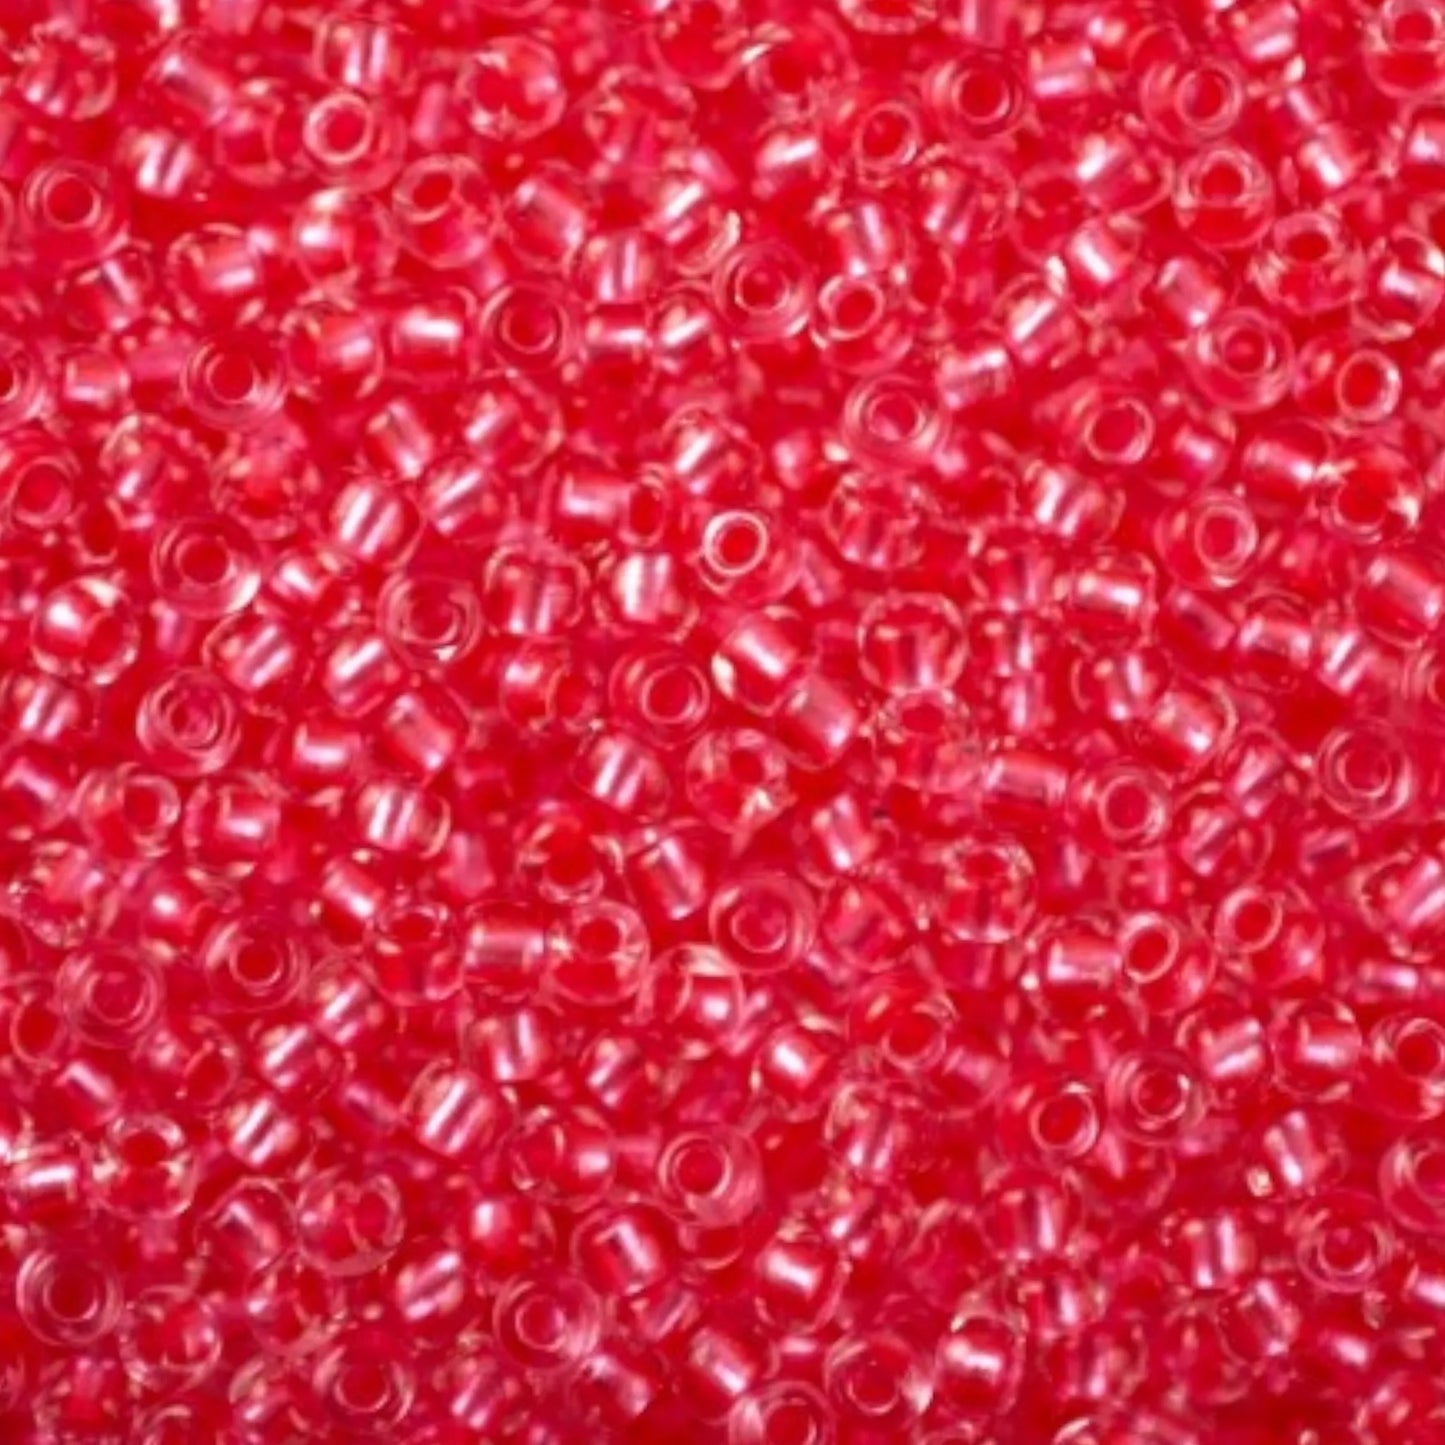 38998 Czech seed beads PRECIOSA Rocailles 10/0 pink. Crystal - Terra Pearl Lined.